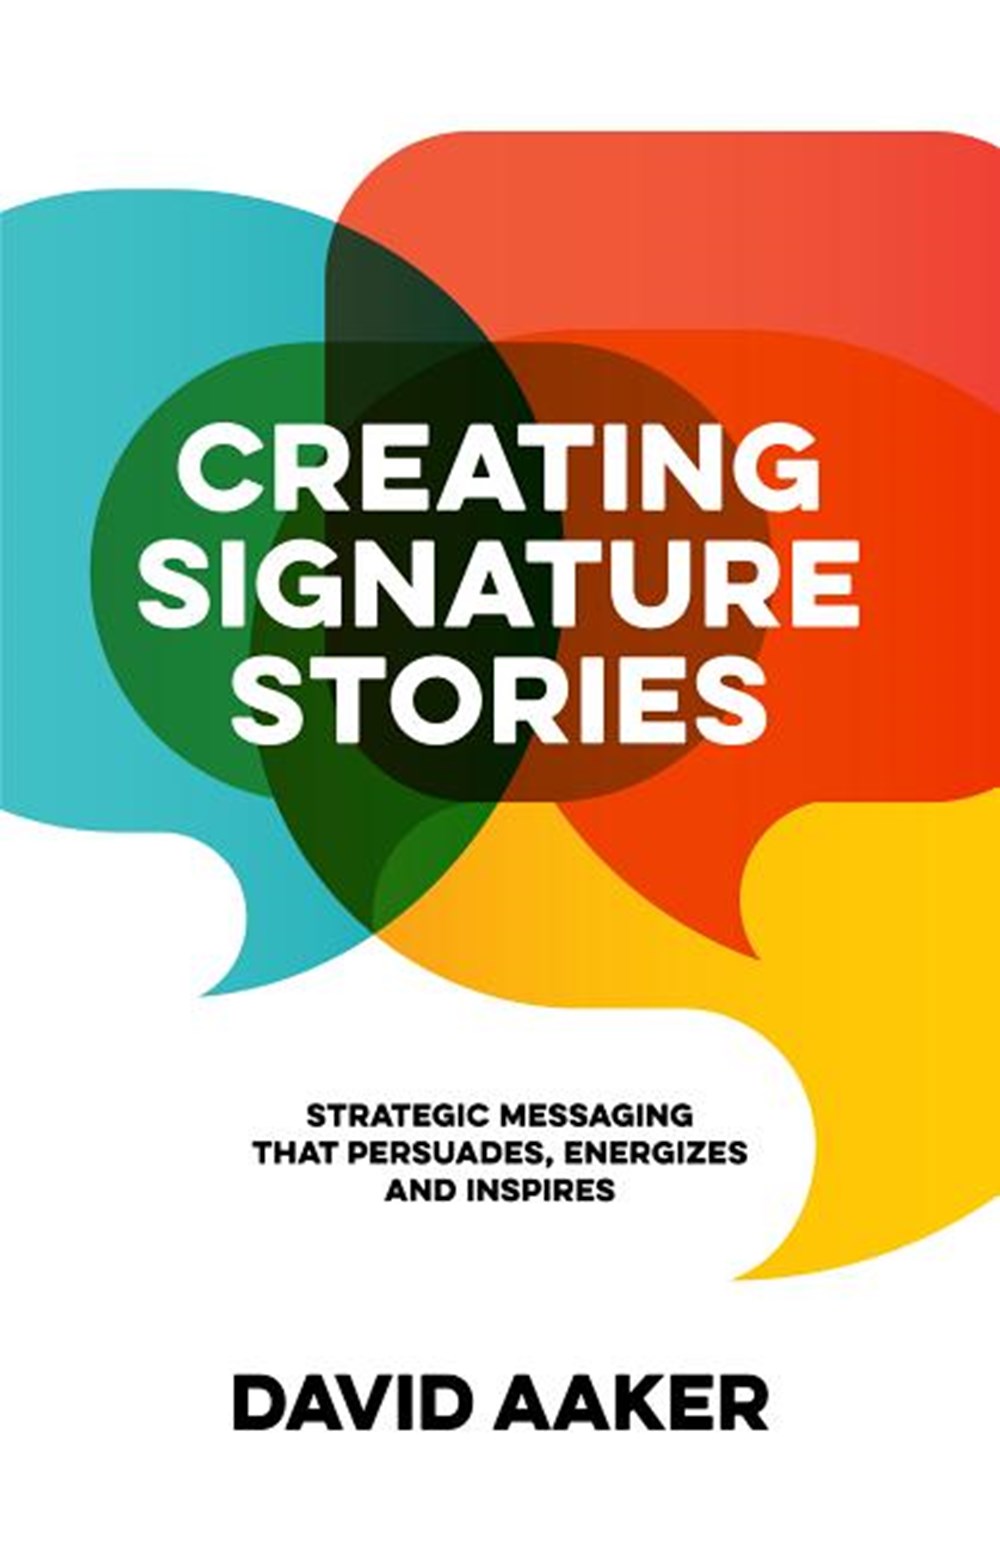 Creating Signature Stories Strategic Messaging That Energizes, Persuades and Inspires